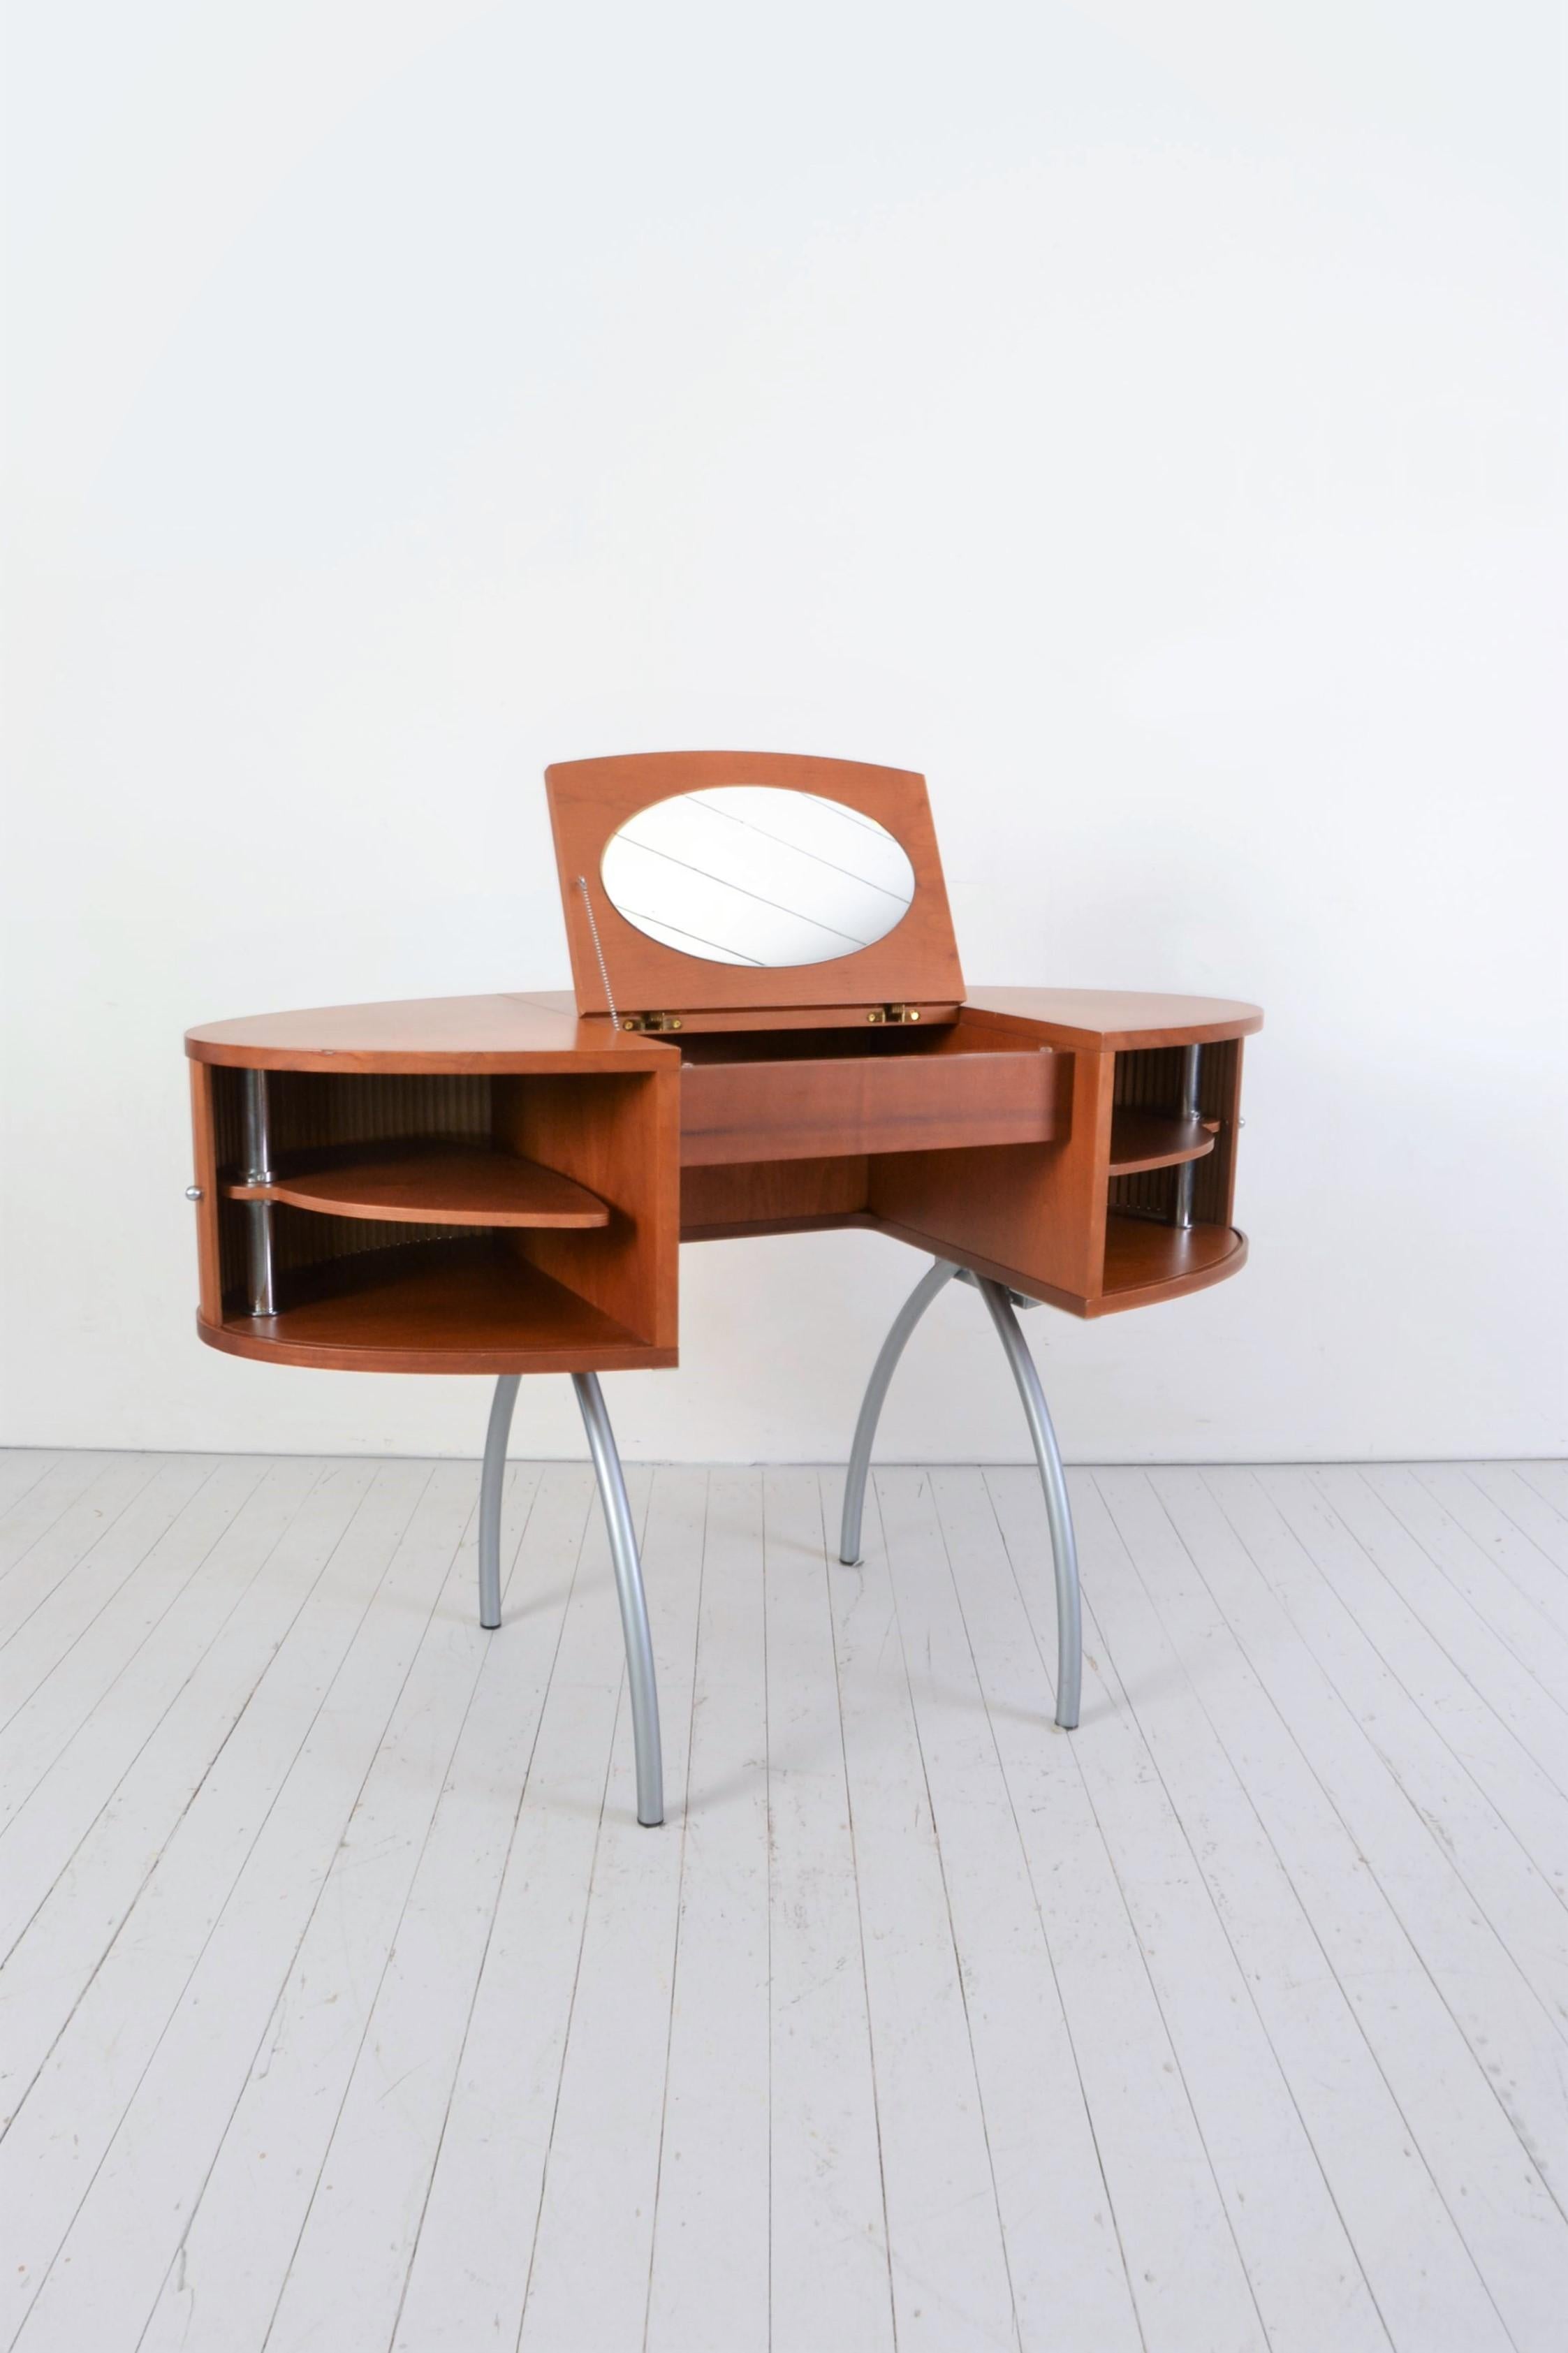 Unique sculptural postmodern vanity desk in cherry wood with chair included.
Beautifull handcrafted details with sliding doors.